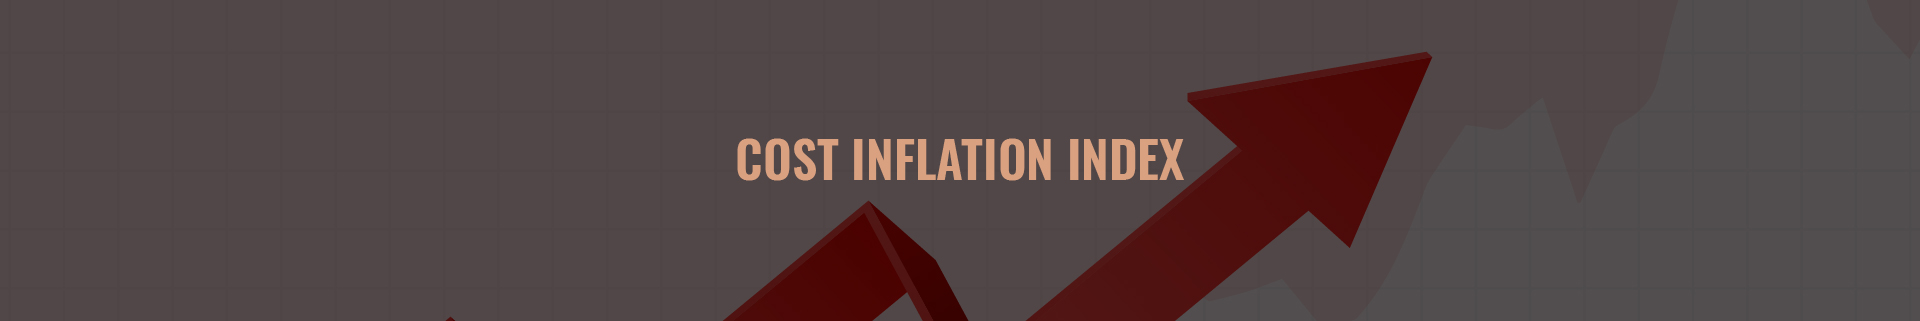 Cost inflation index